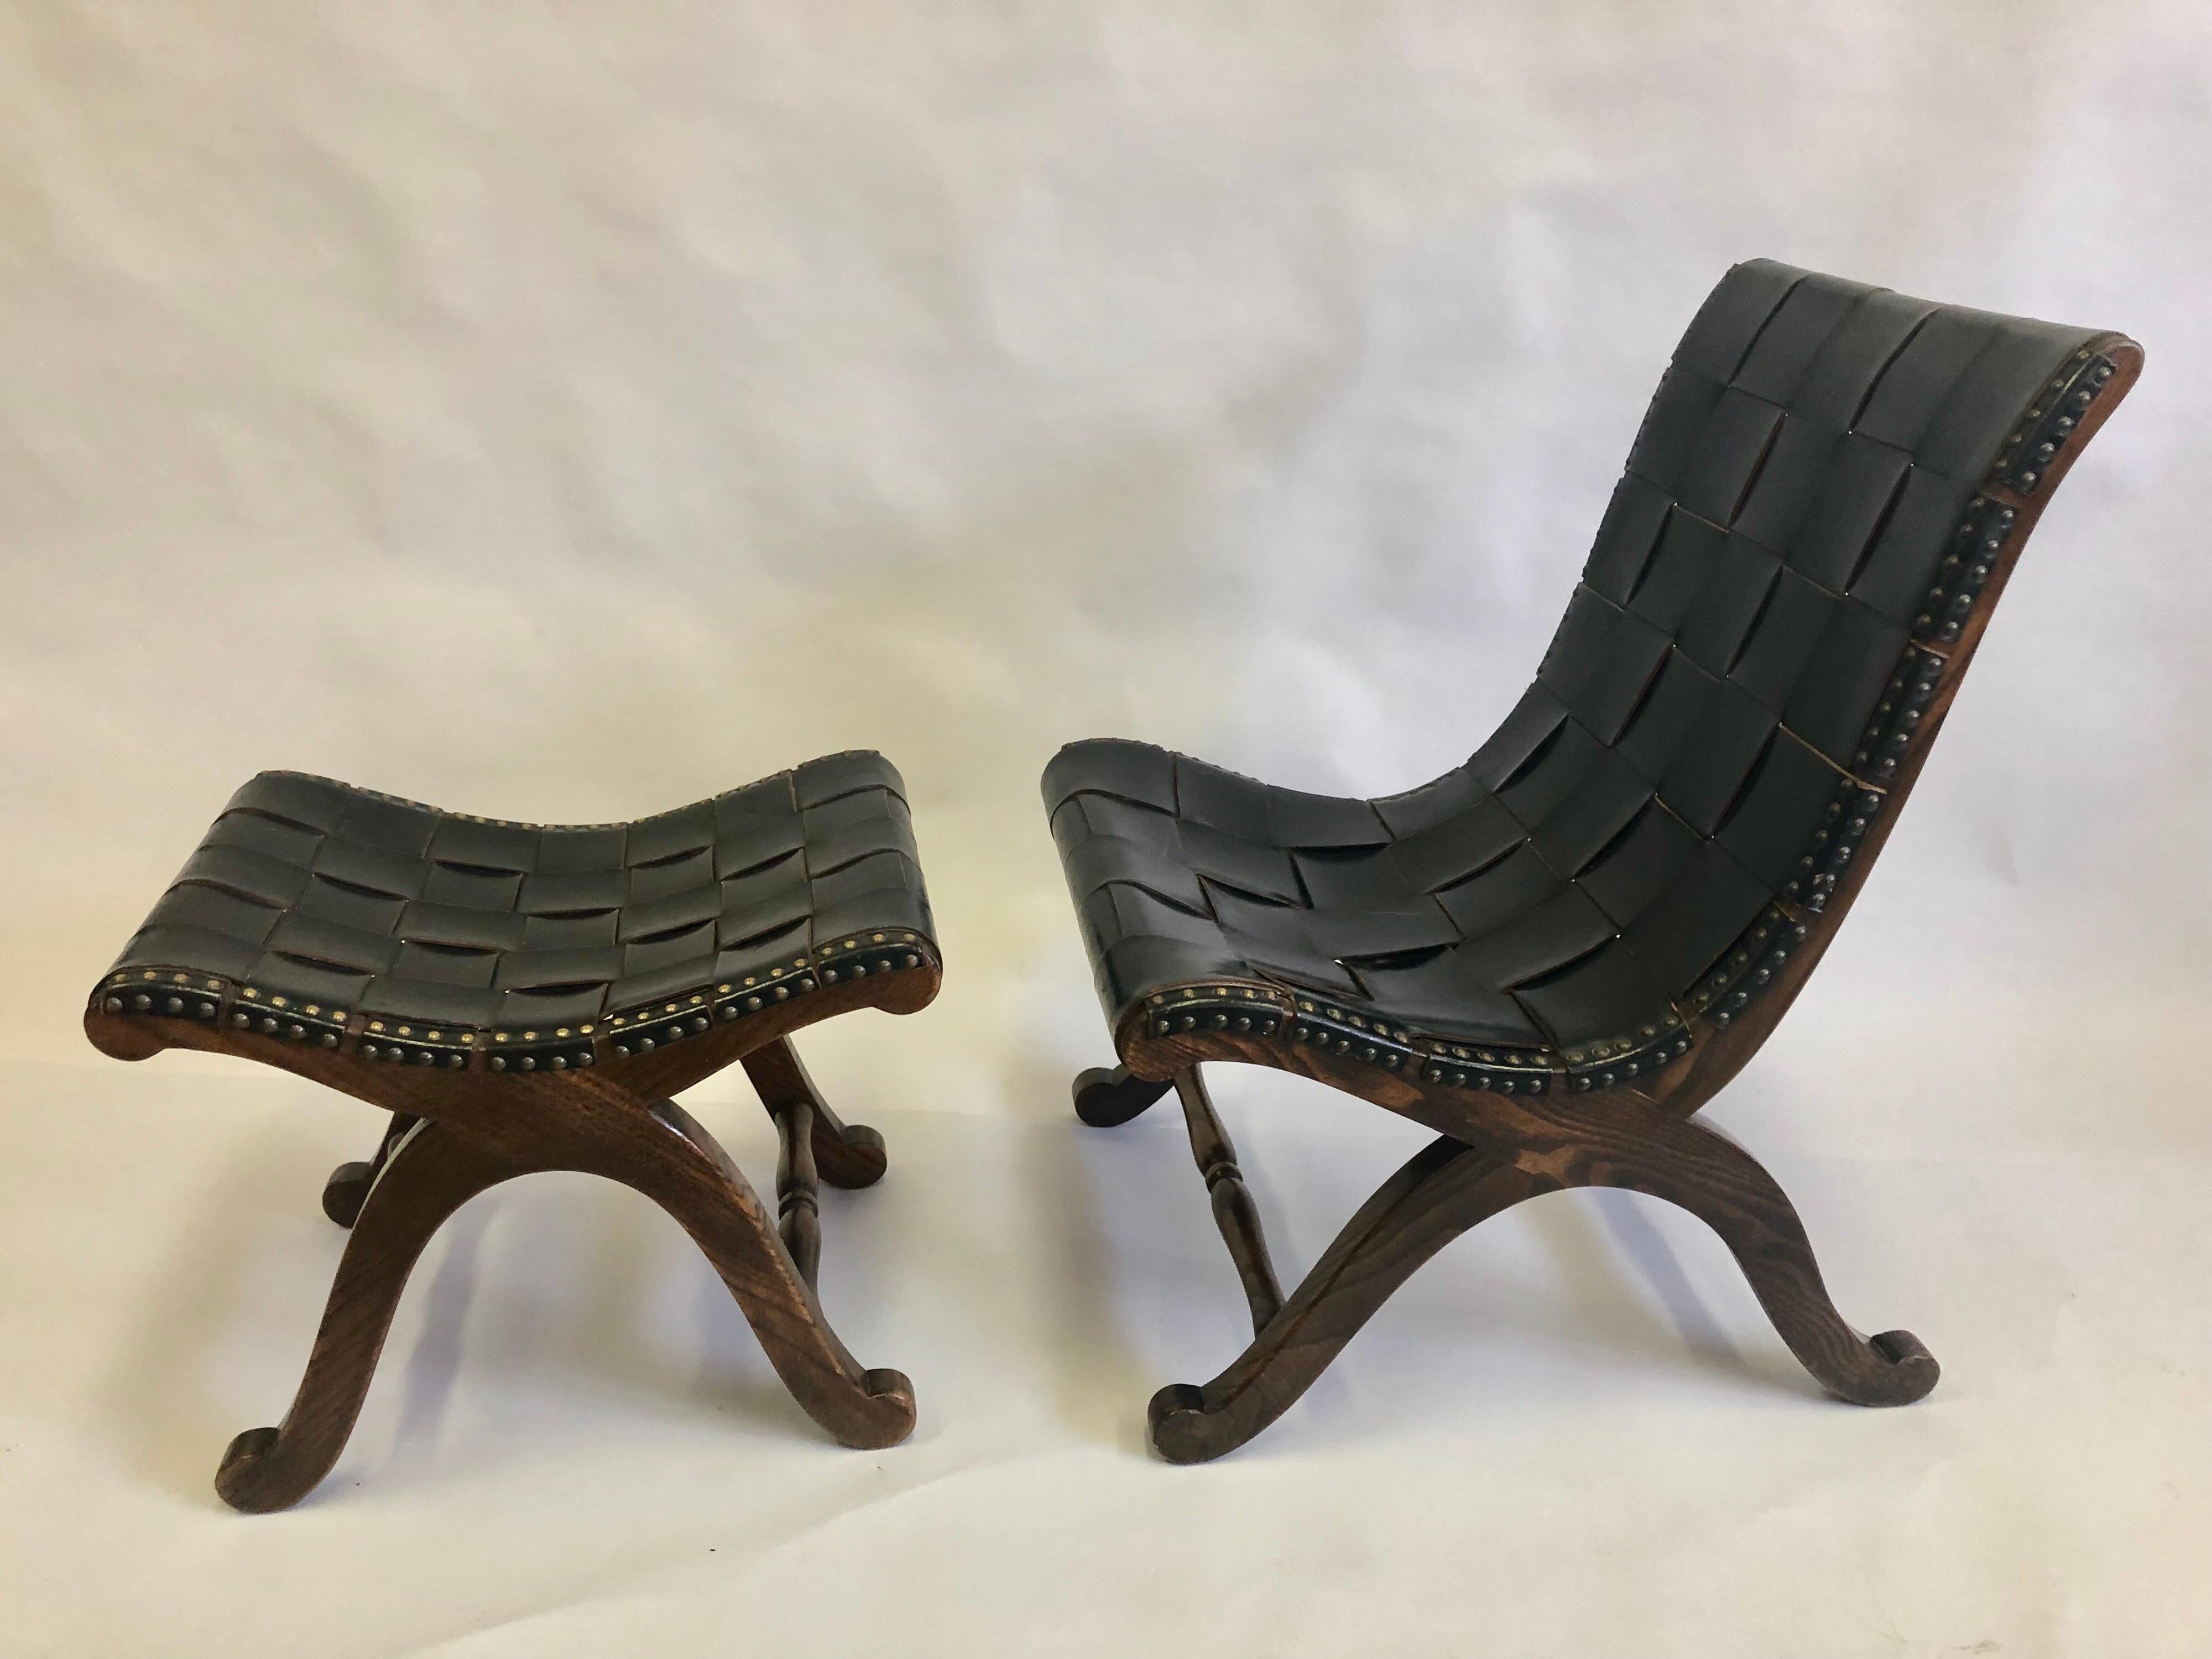 French Mid-Century Modern Neoclassical black leather strap lounge / slipper chair and ottoman / stool attributed to Pierre Lottier featuring a solid hard wood frame constructed in a curile X form. 

The chair and ottoman / stool are interlaced with